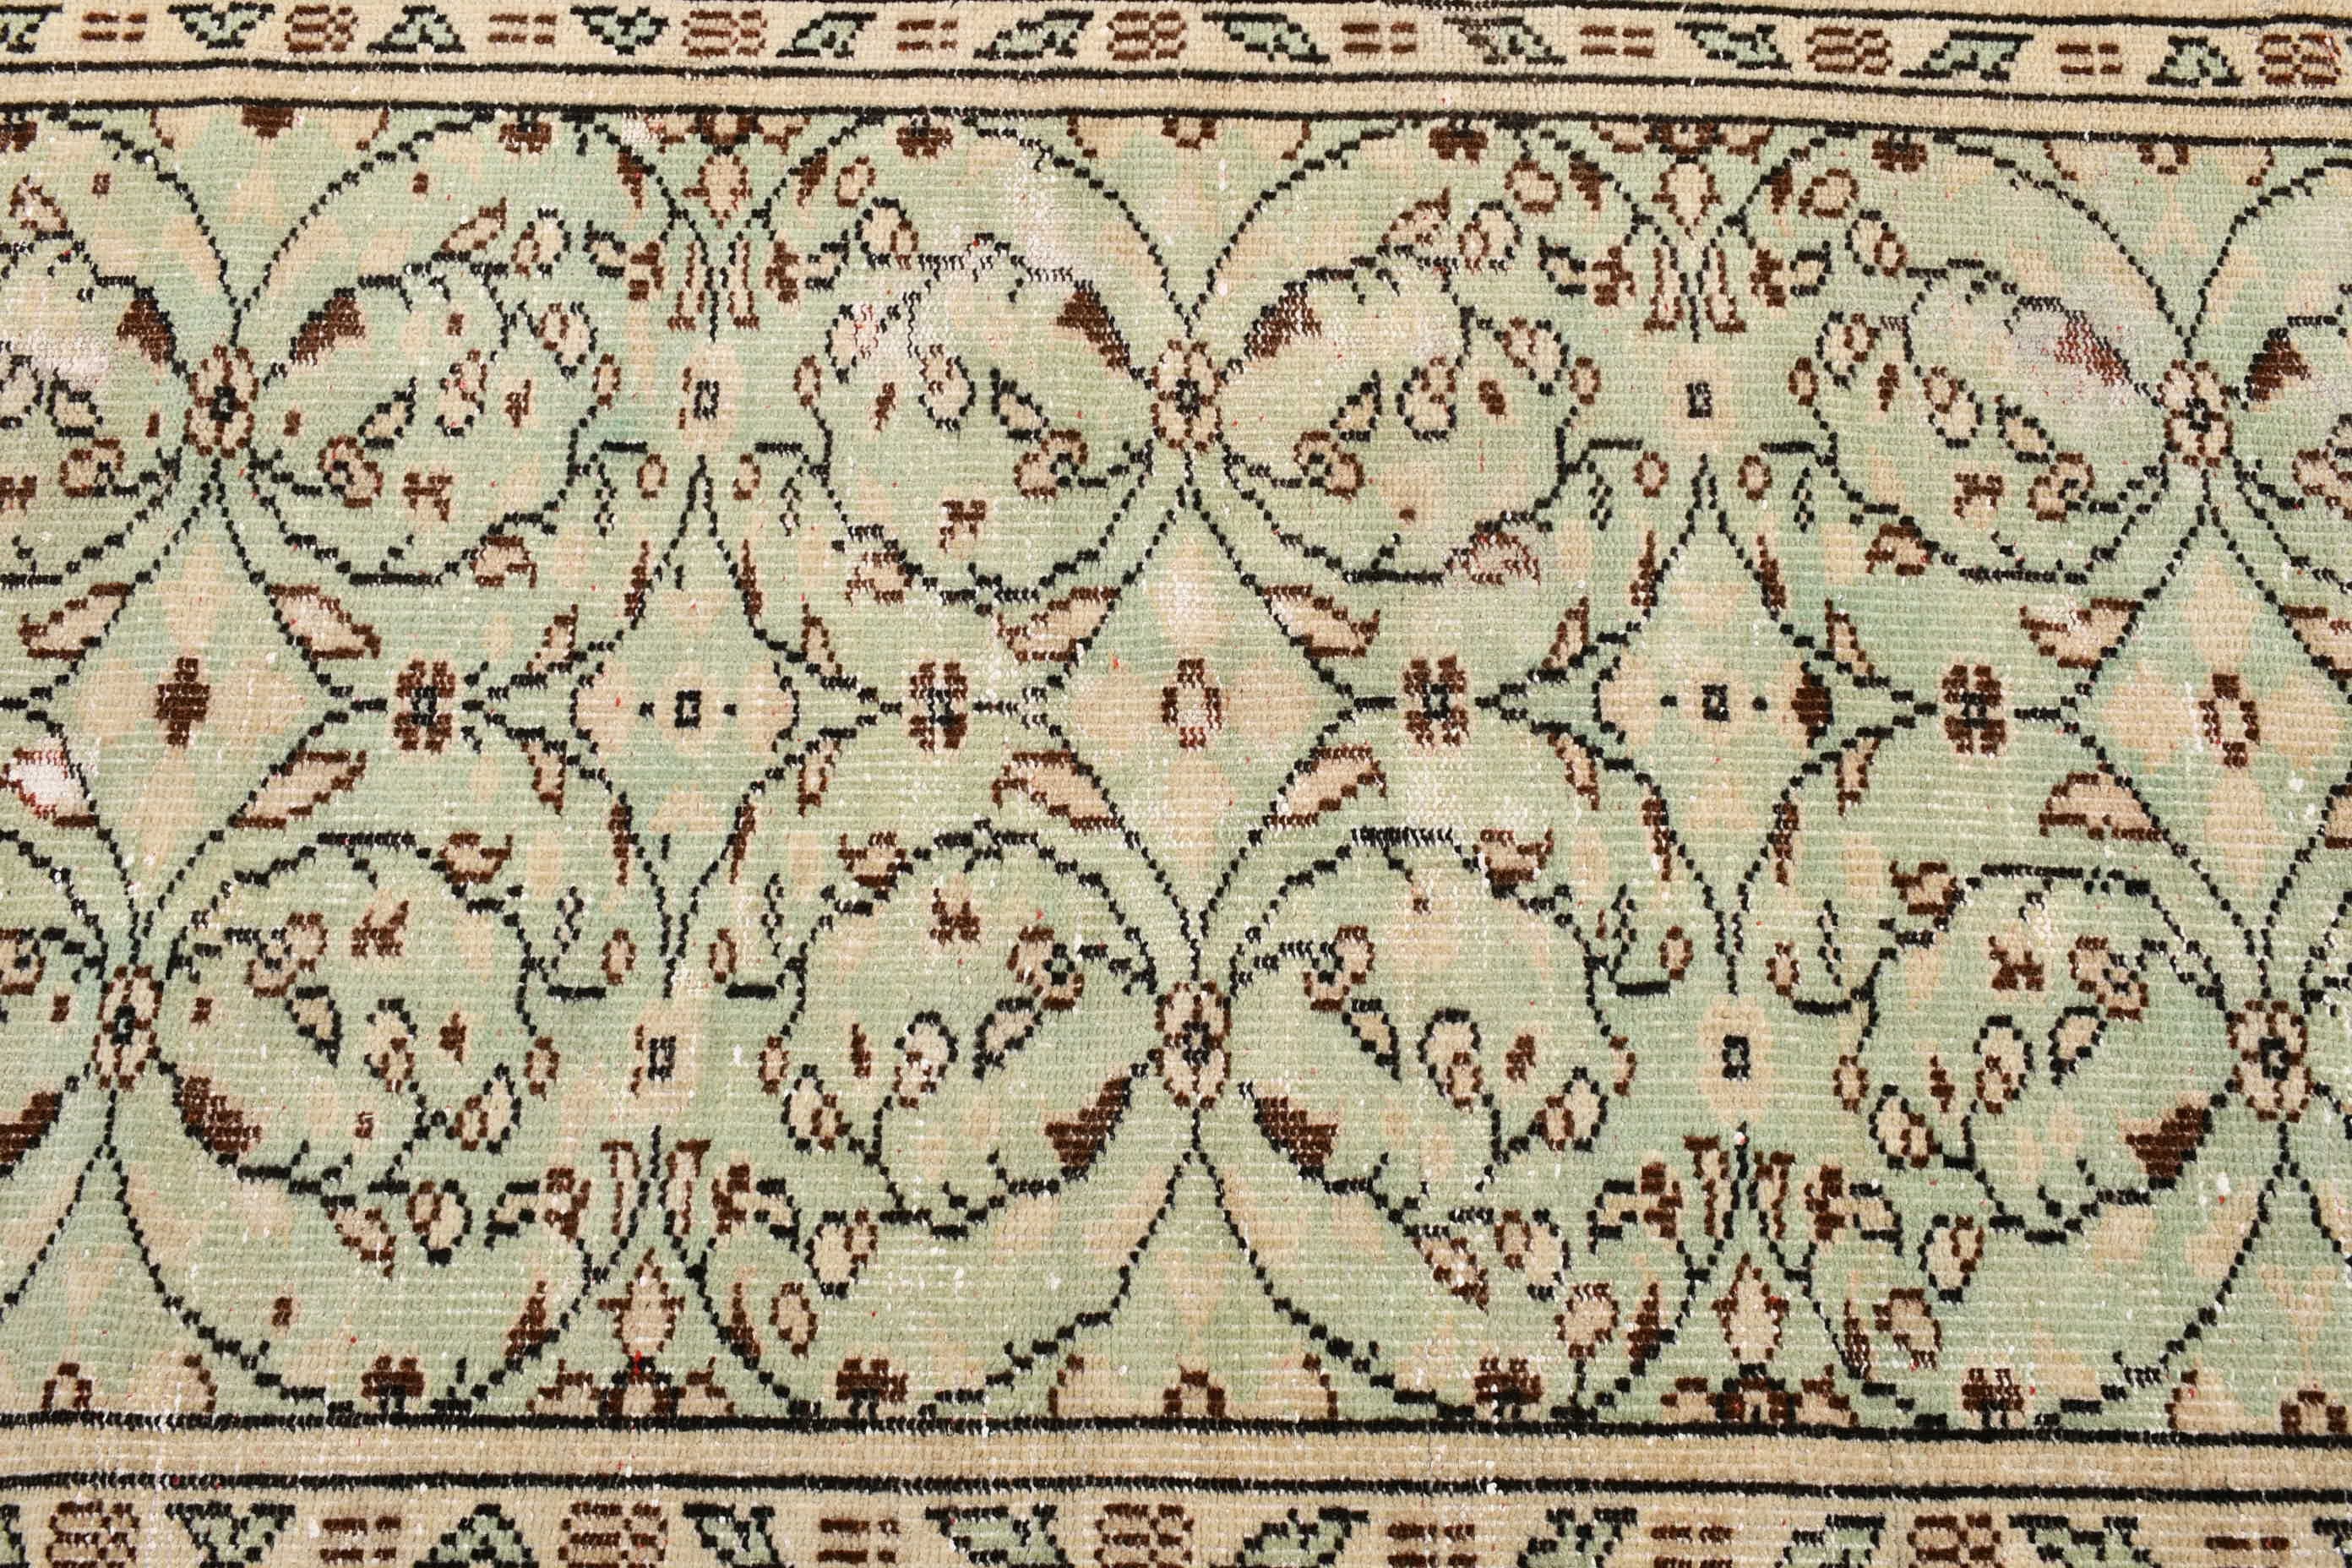 Kitchen Rugs, Vintage Rug, Bedroom Rugs, Turkish Rug, Green Antique Rug, Oushak Rugs, 2.8x6.3 ft Accent Rugs, Rugs for Entry, Nomadic Rug